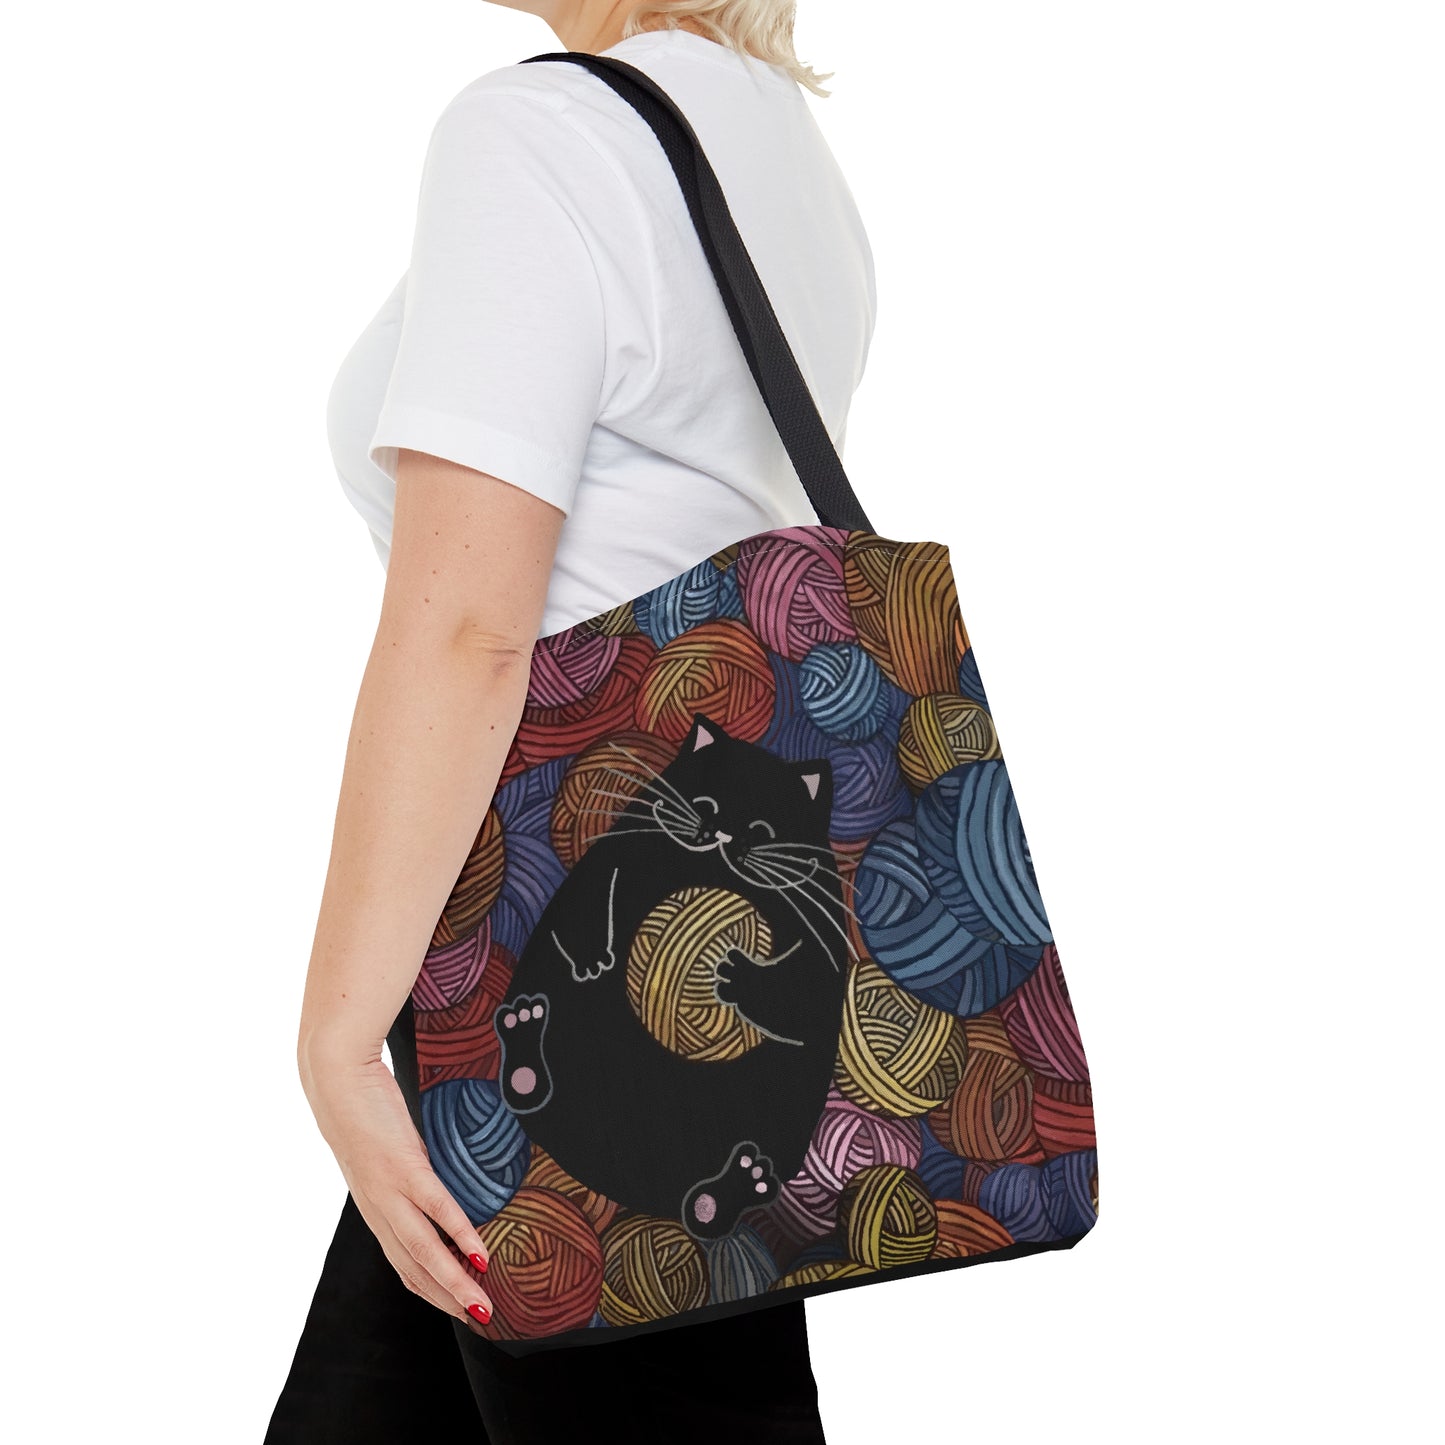 Tote Bag - Cat with Yarn Design